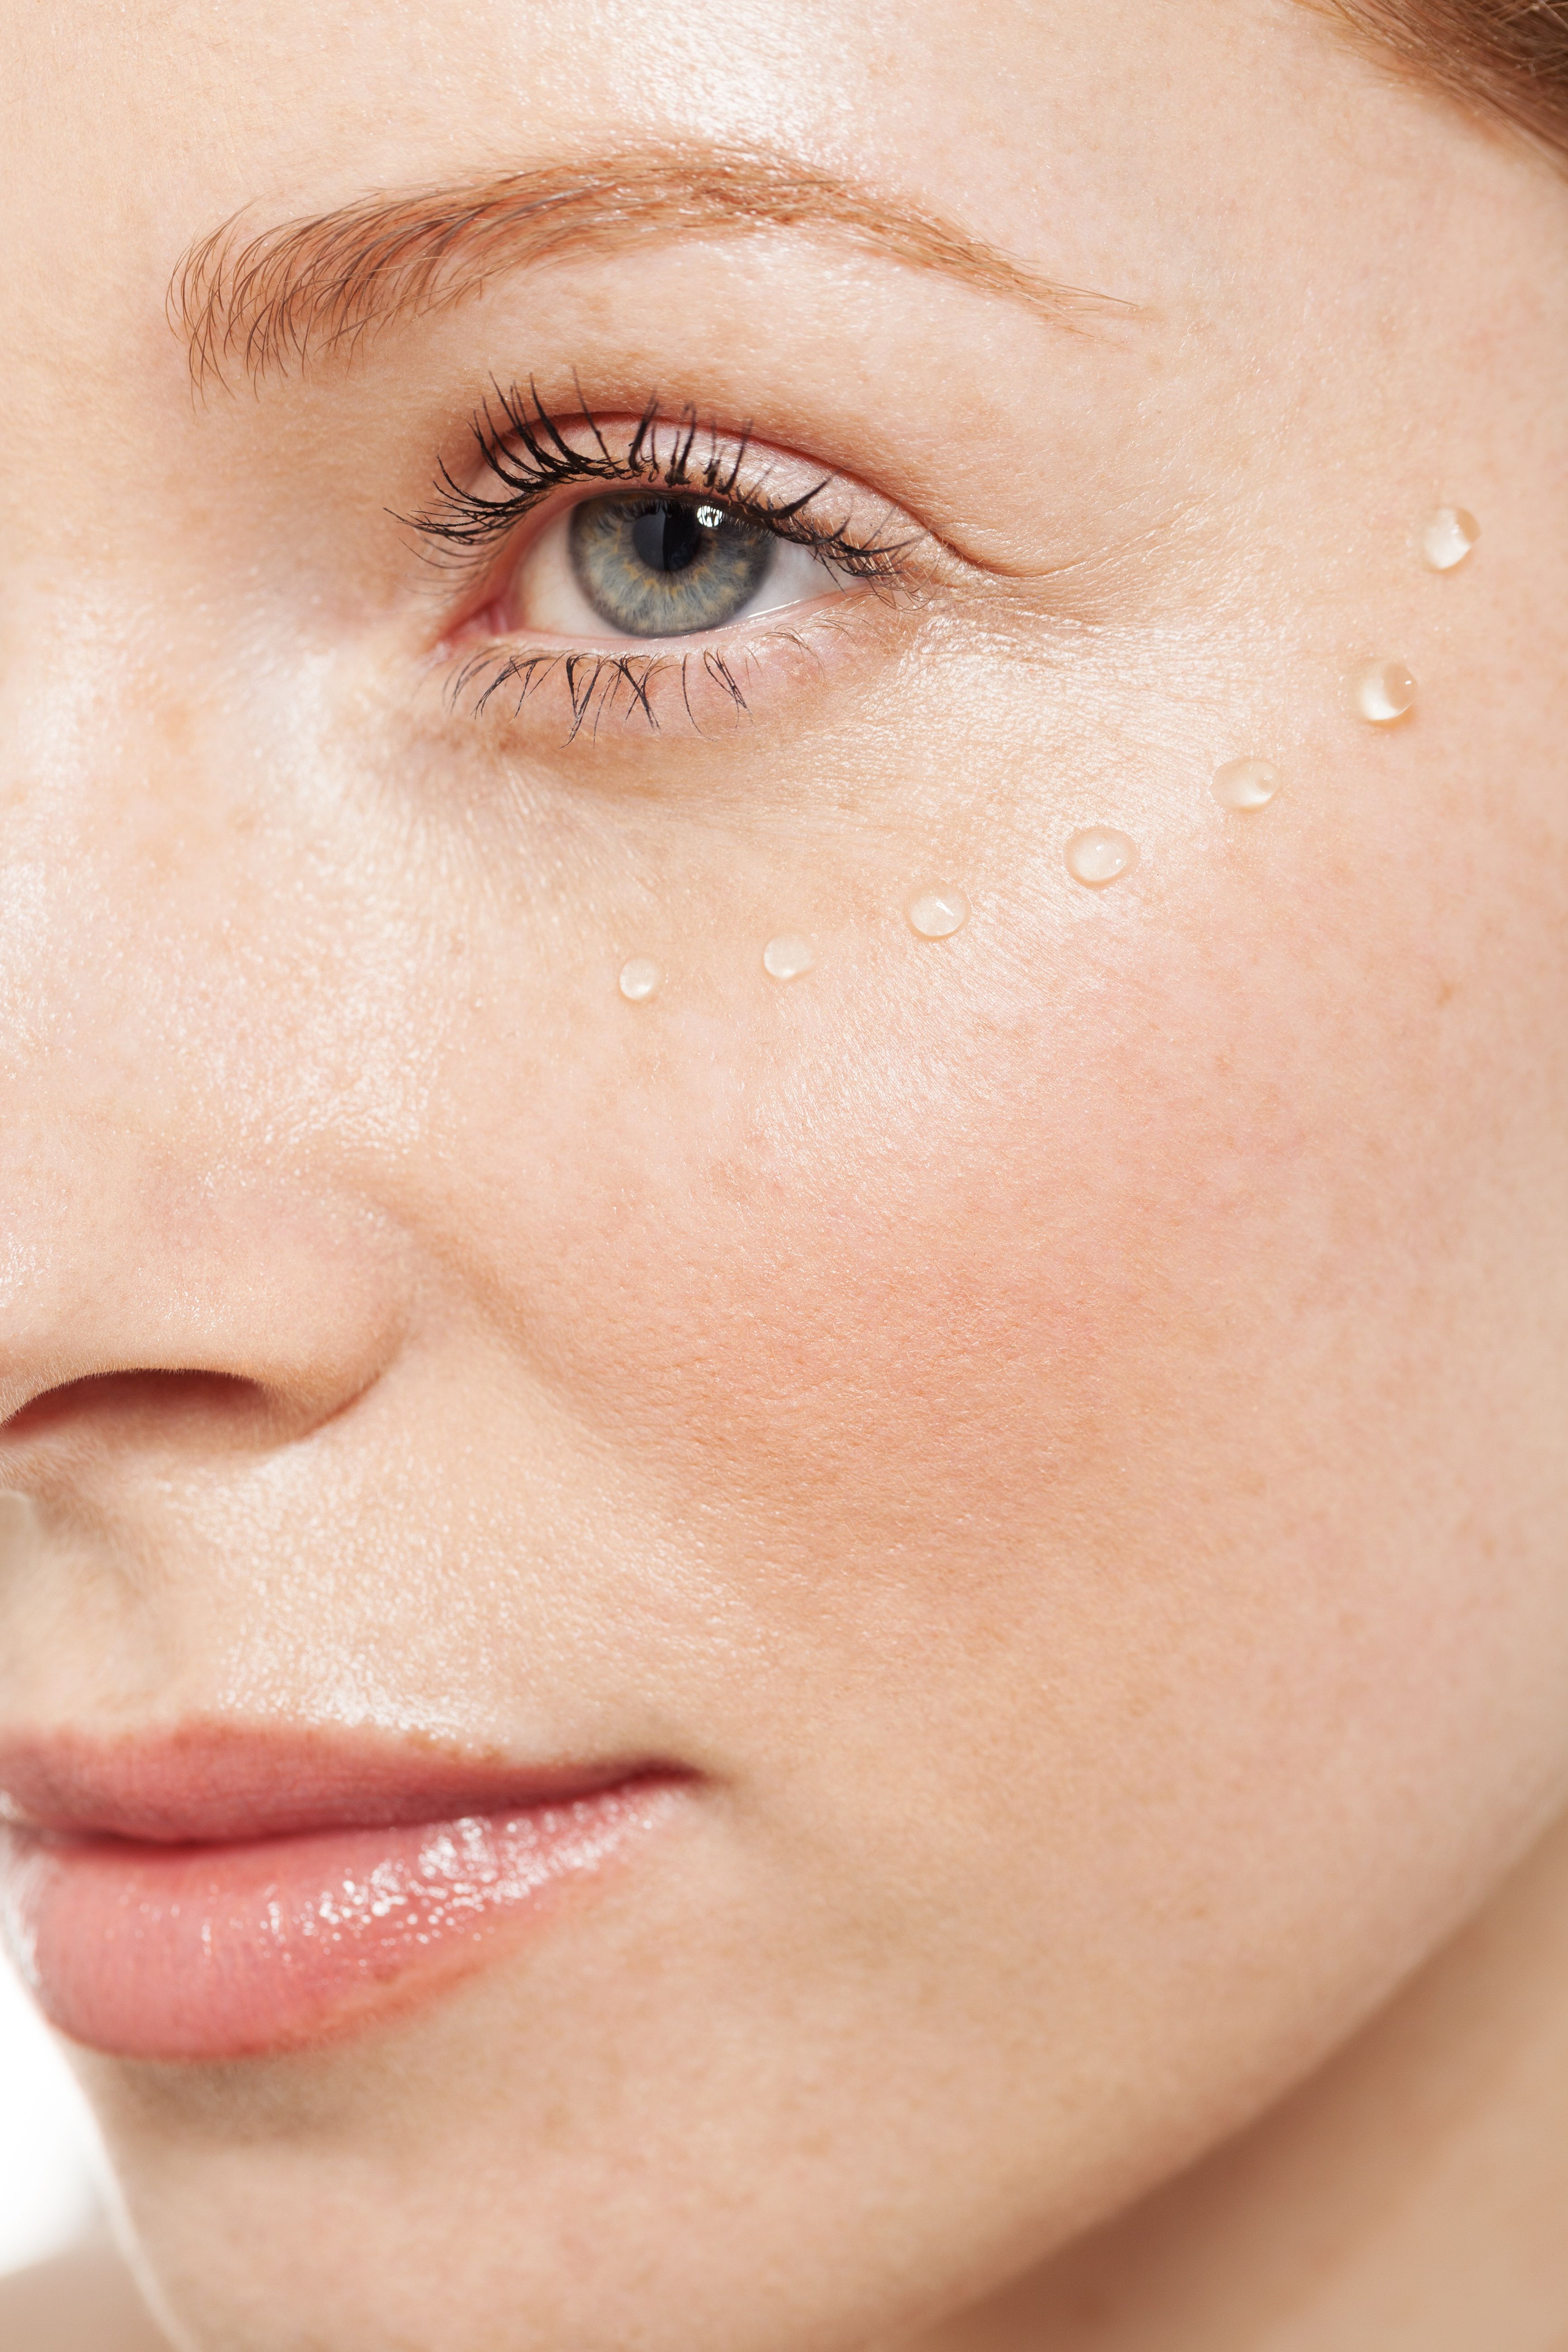 Dry Eyelids Causes And Remes